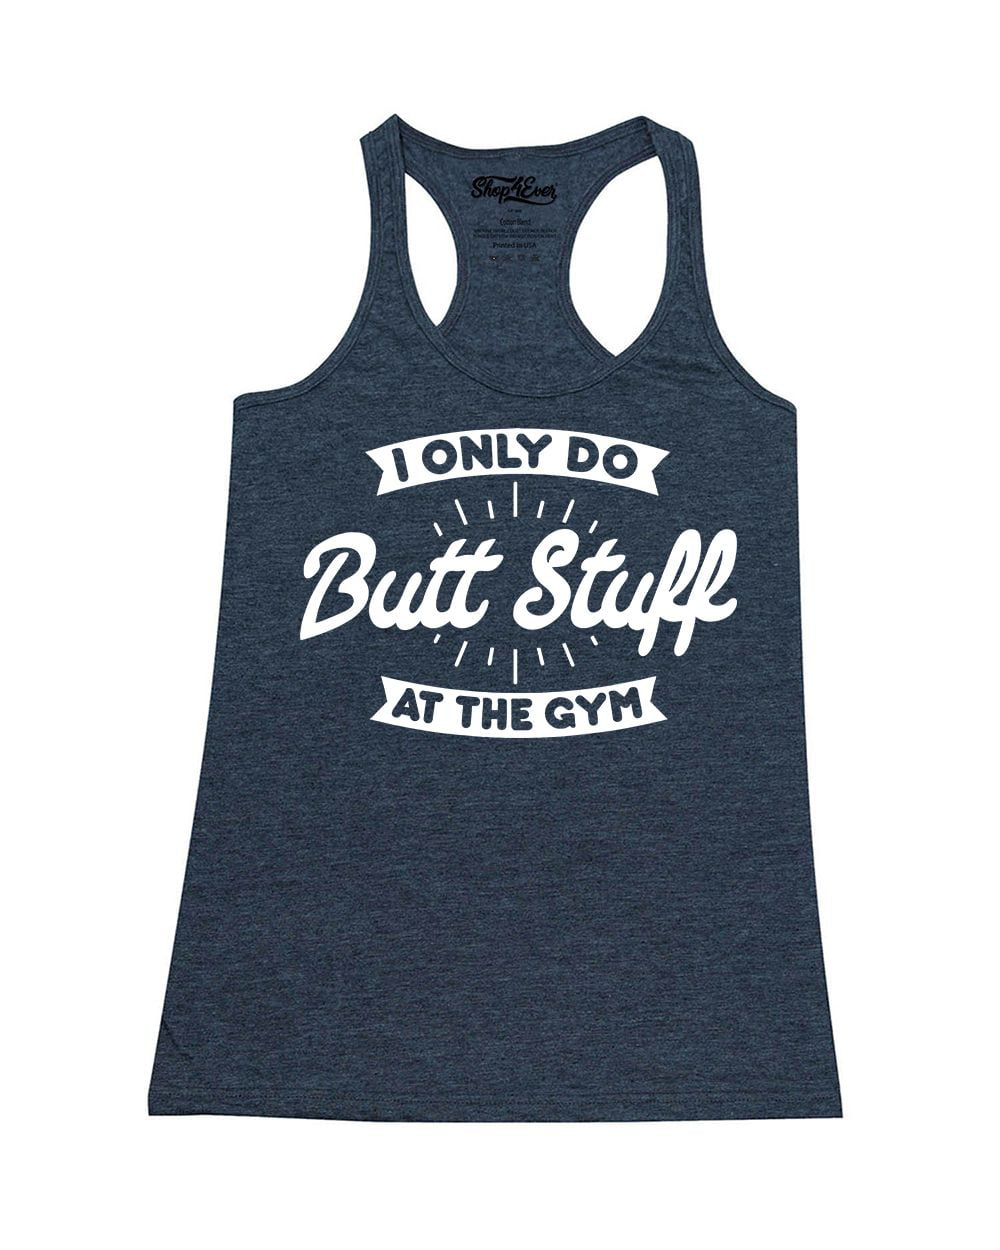 Shop4Ever - Shop4Ever Women's I Only do Butt Stuff at the Gym Racerback ...